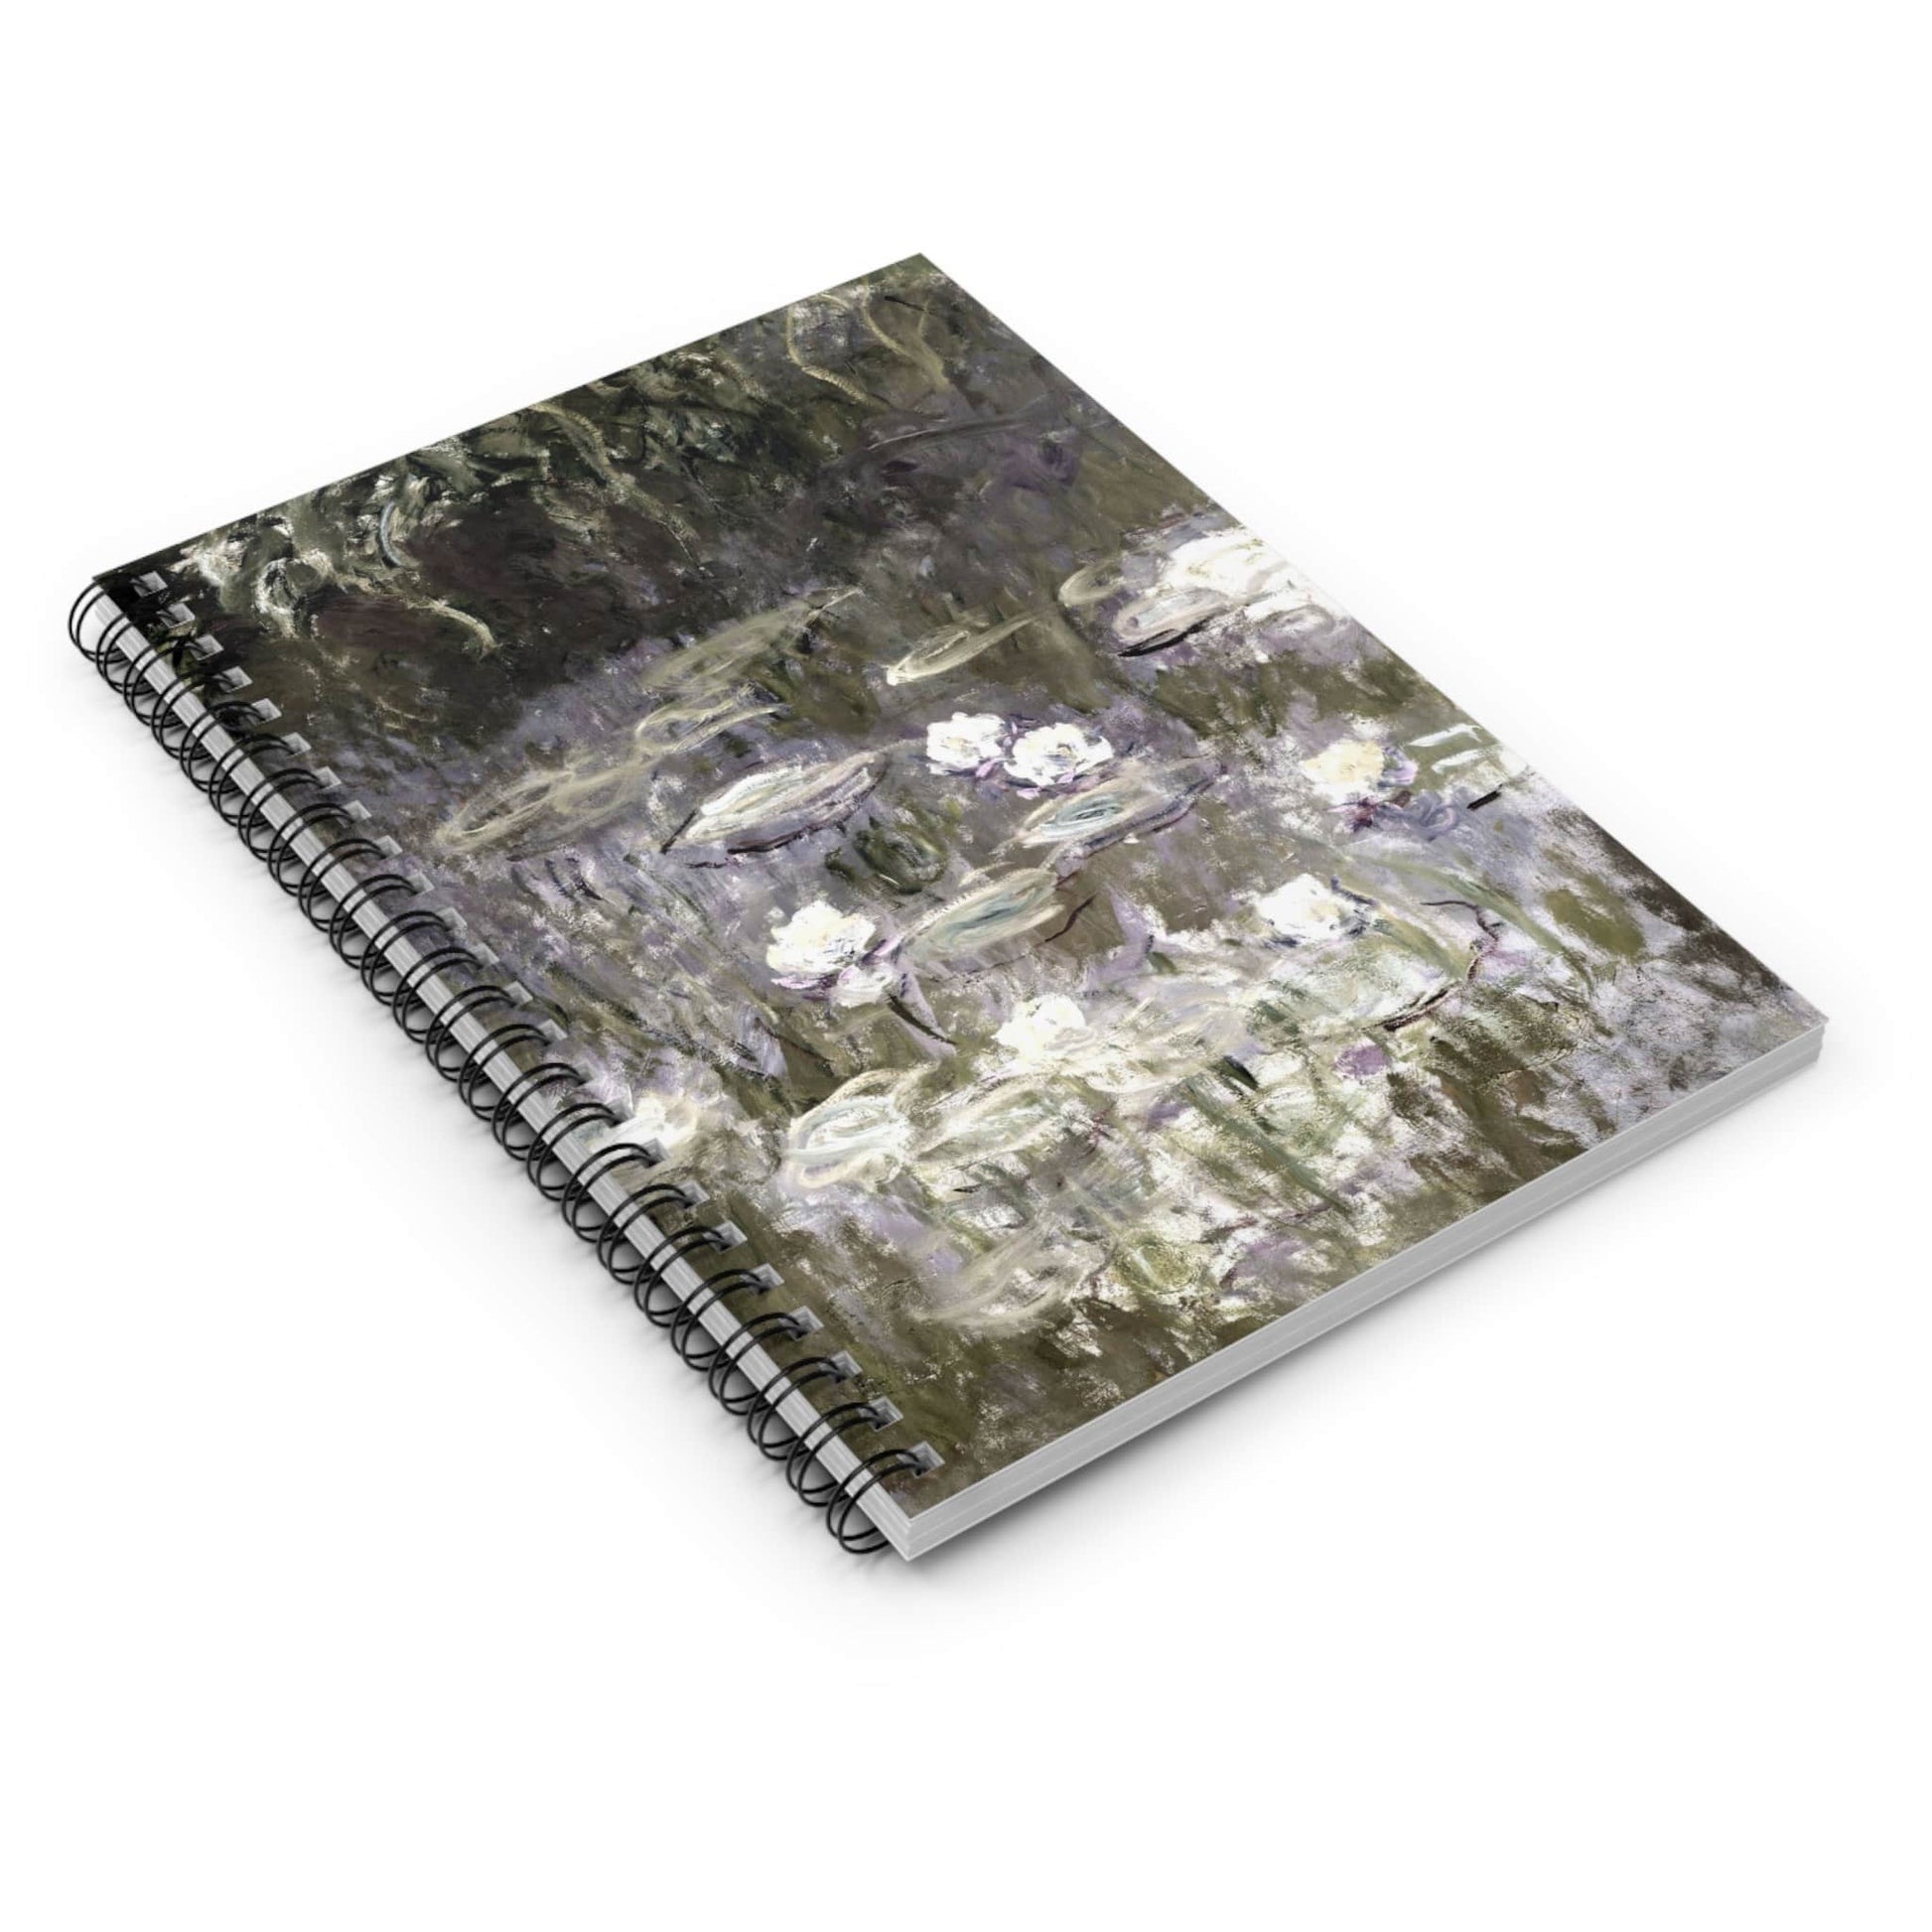 White Lilies on a Pond Spiral Notebook Laying Flat on White Surface